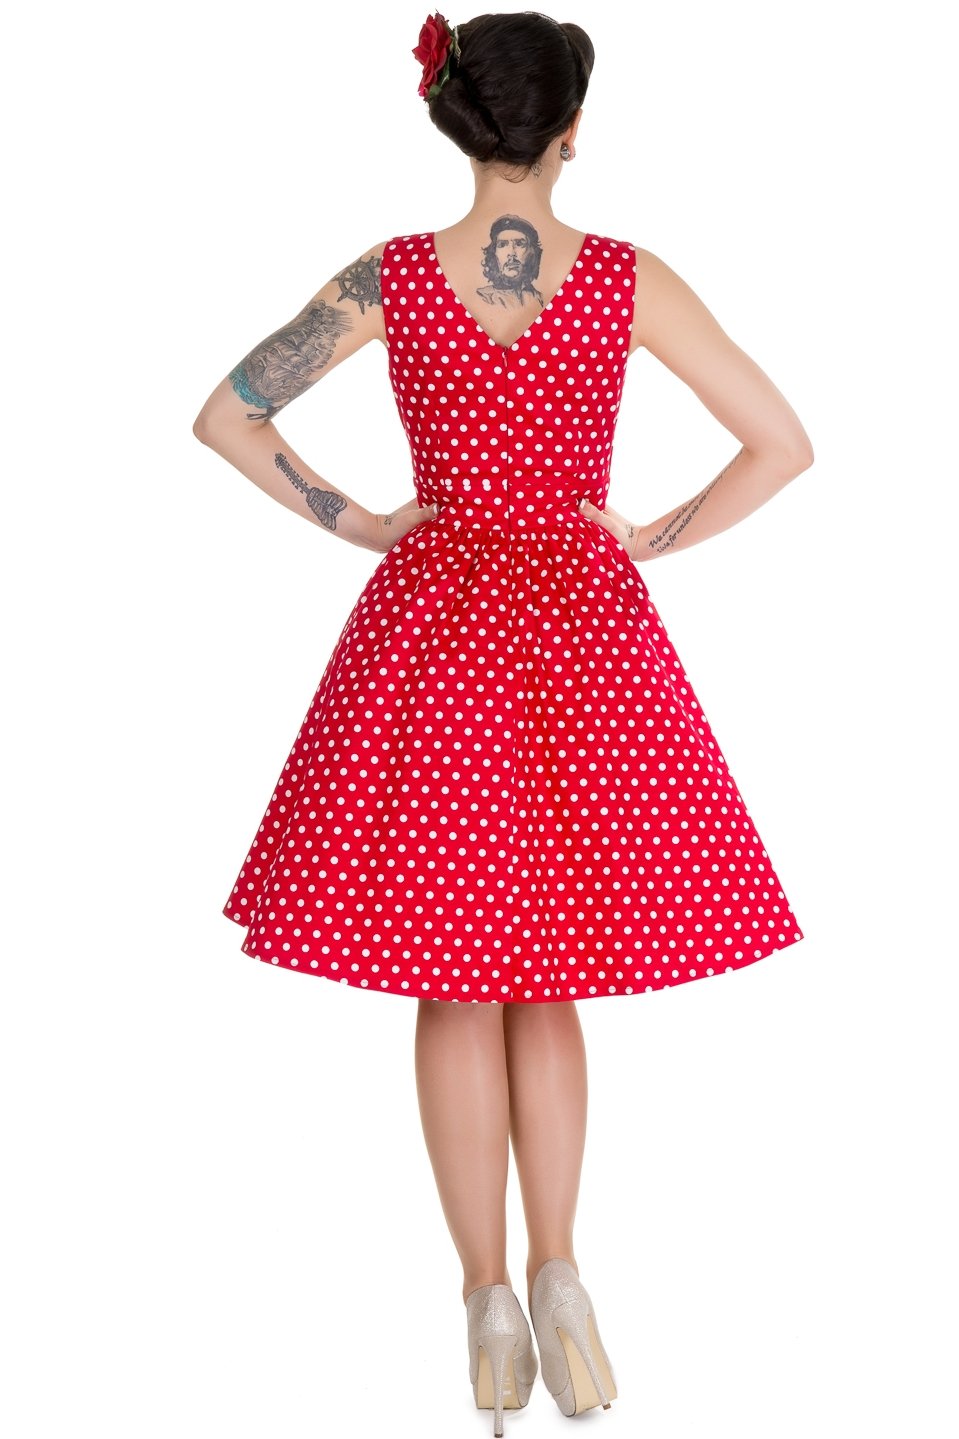 Model wearing our May crossover bust dress, in red/white polka dot print, back view